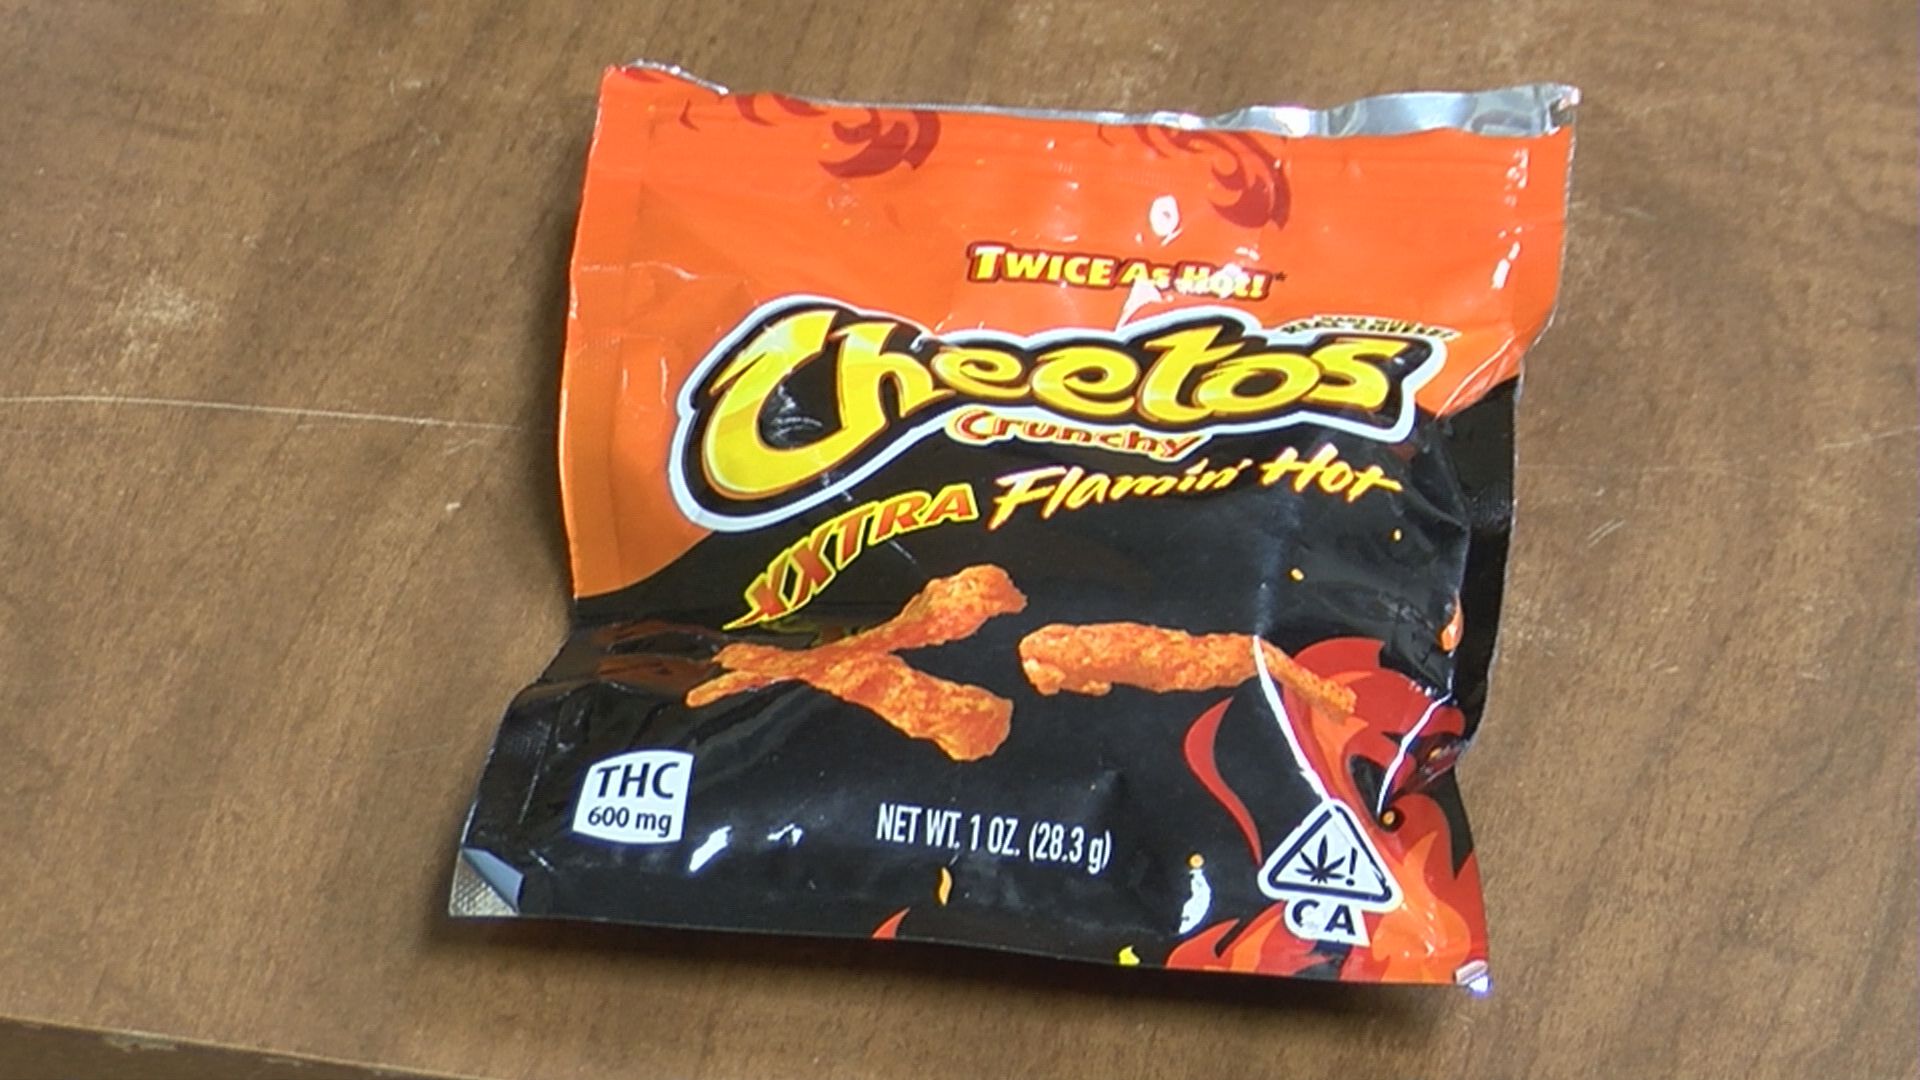 Several Students Sick After Eating Cheetos Chips Laced With Cannabis